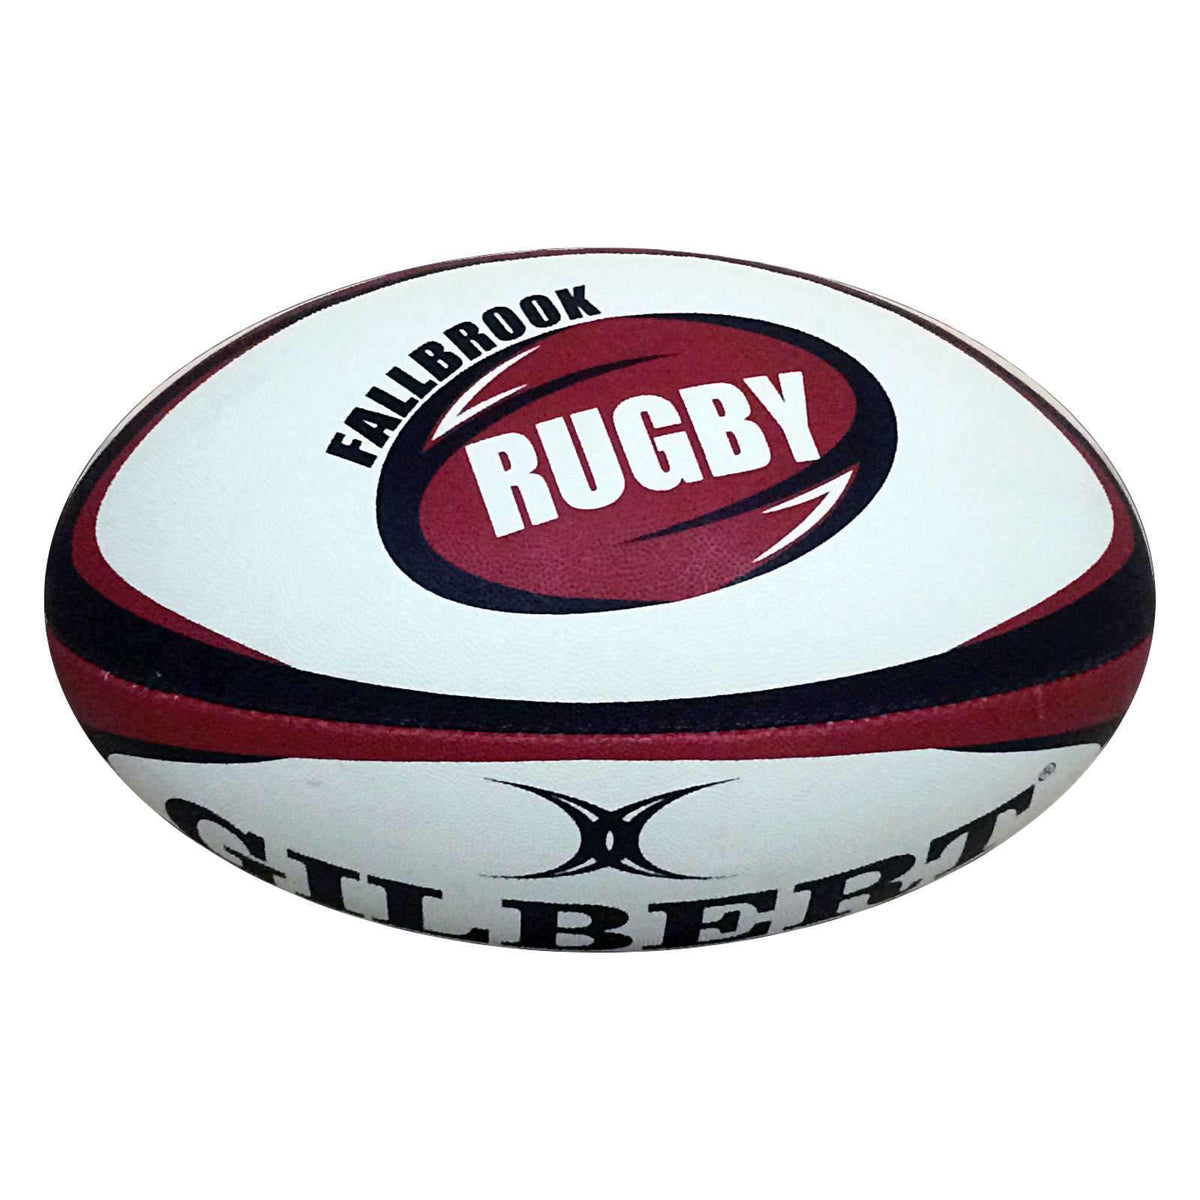 Gilbert Custom Rugby Balls - Rugby Imports